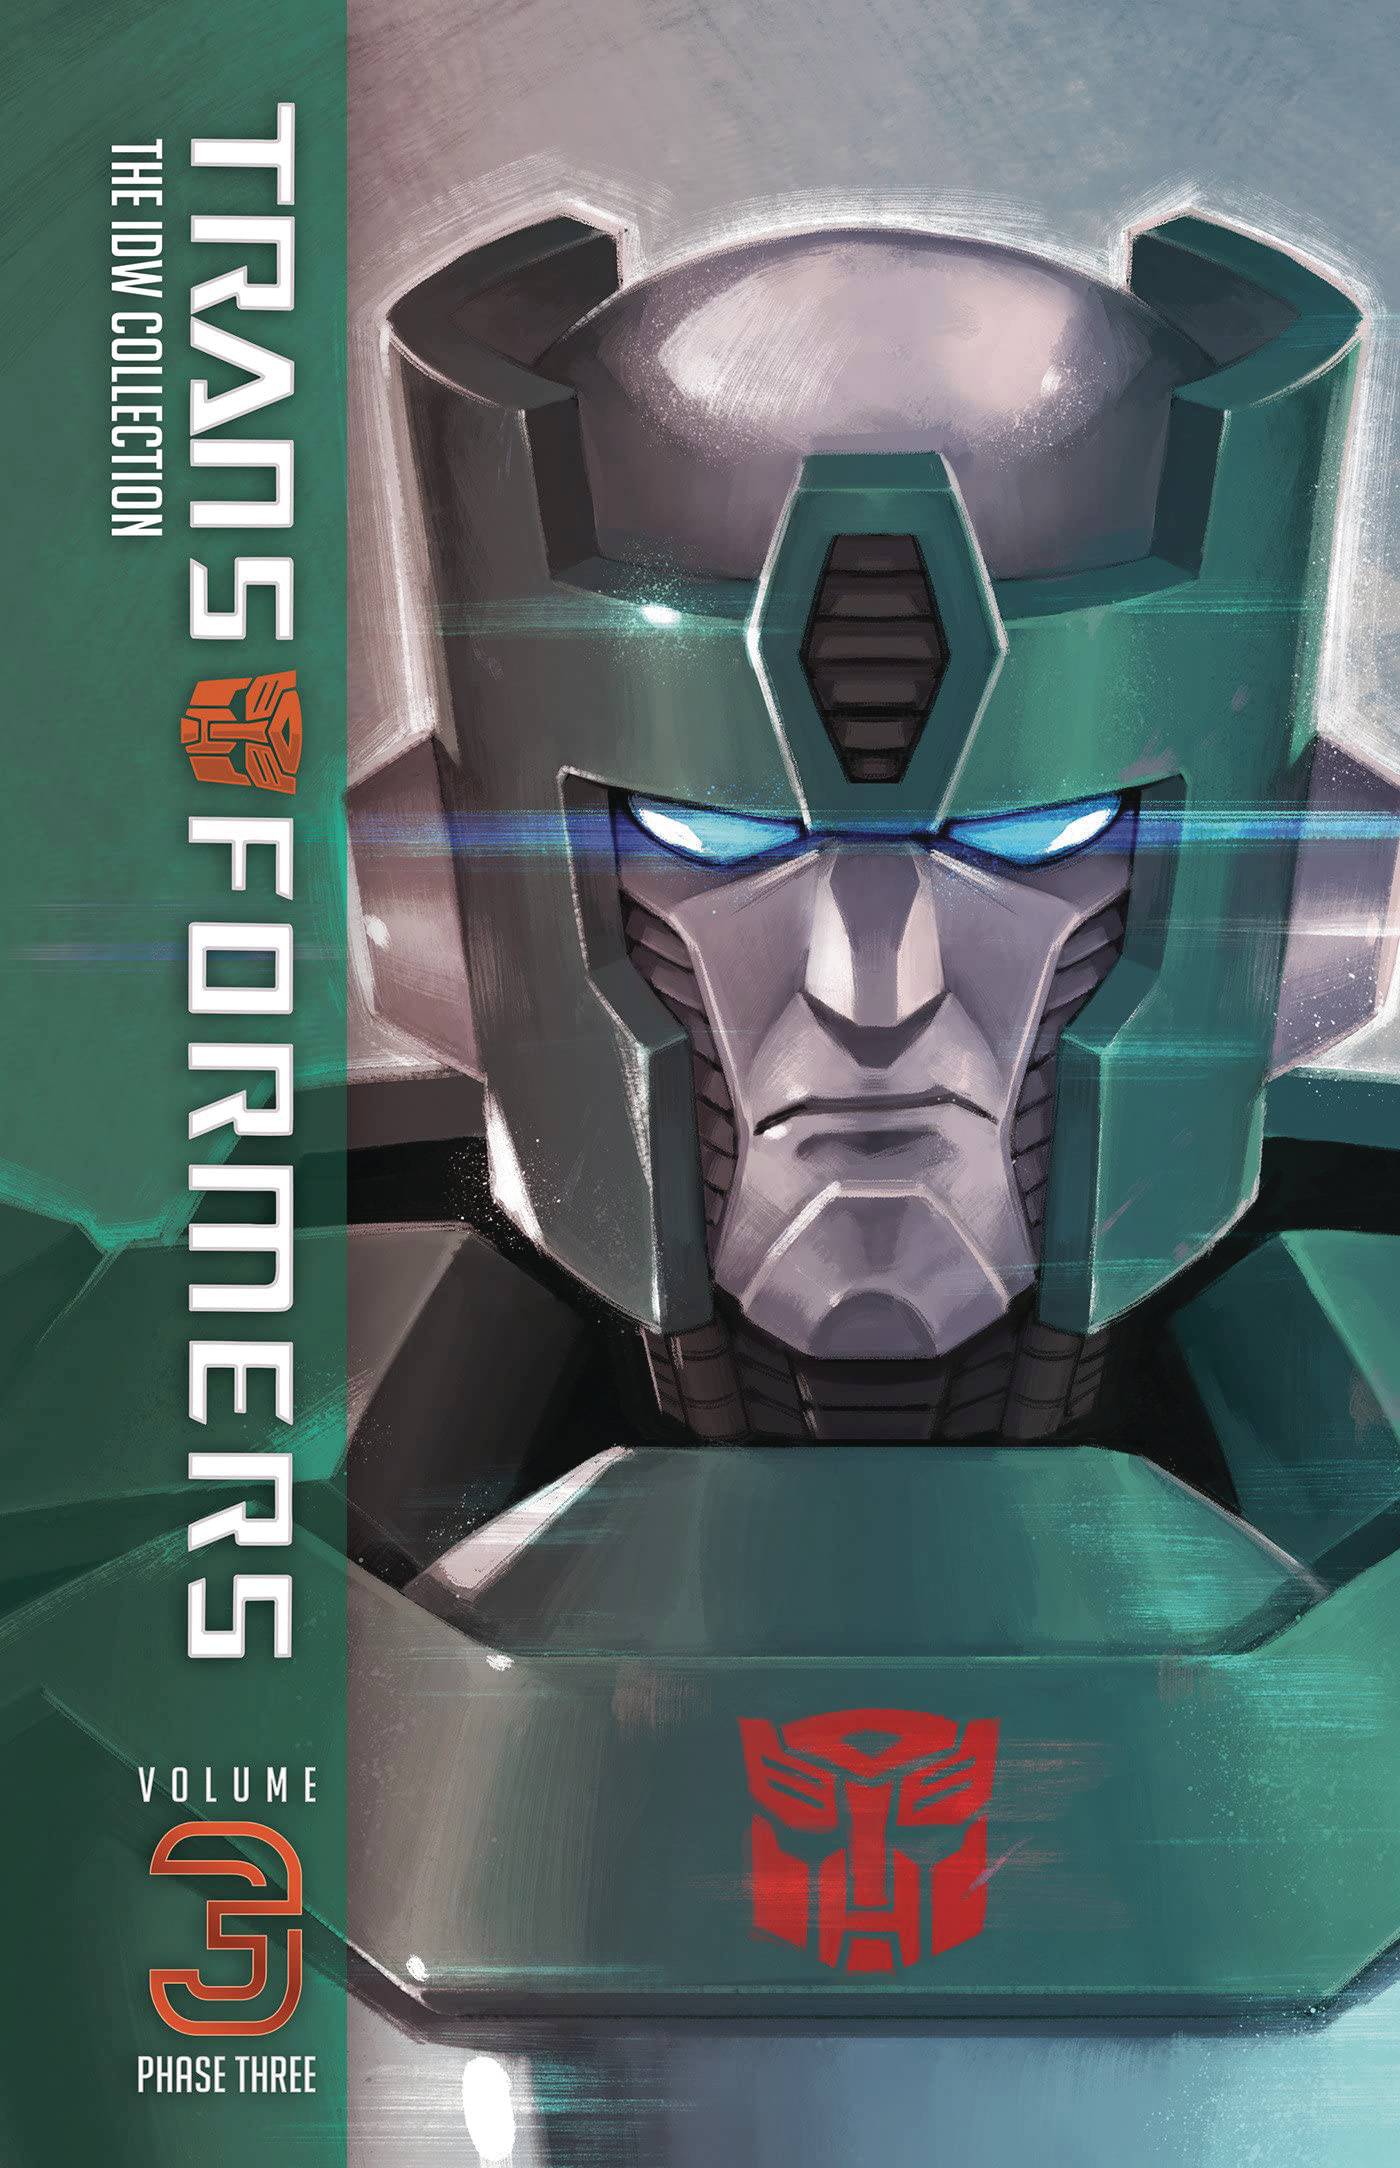 TRANSFORMERS IDW COLLECTION PHASE 3 HC VOL 03